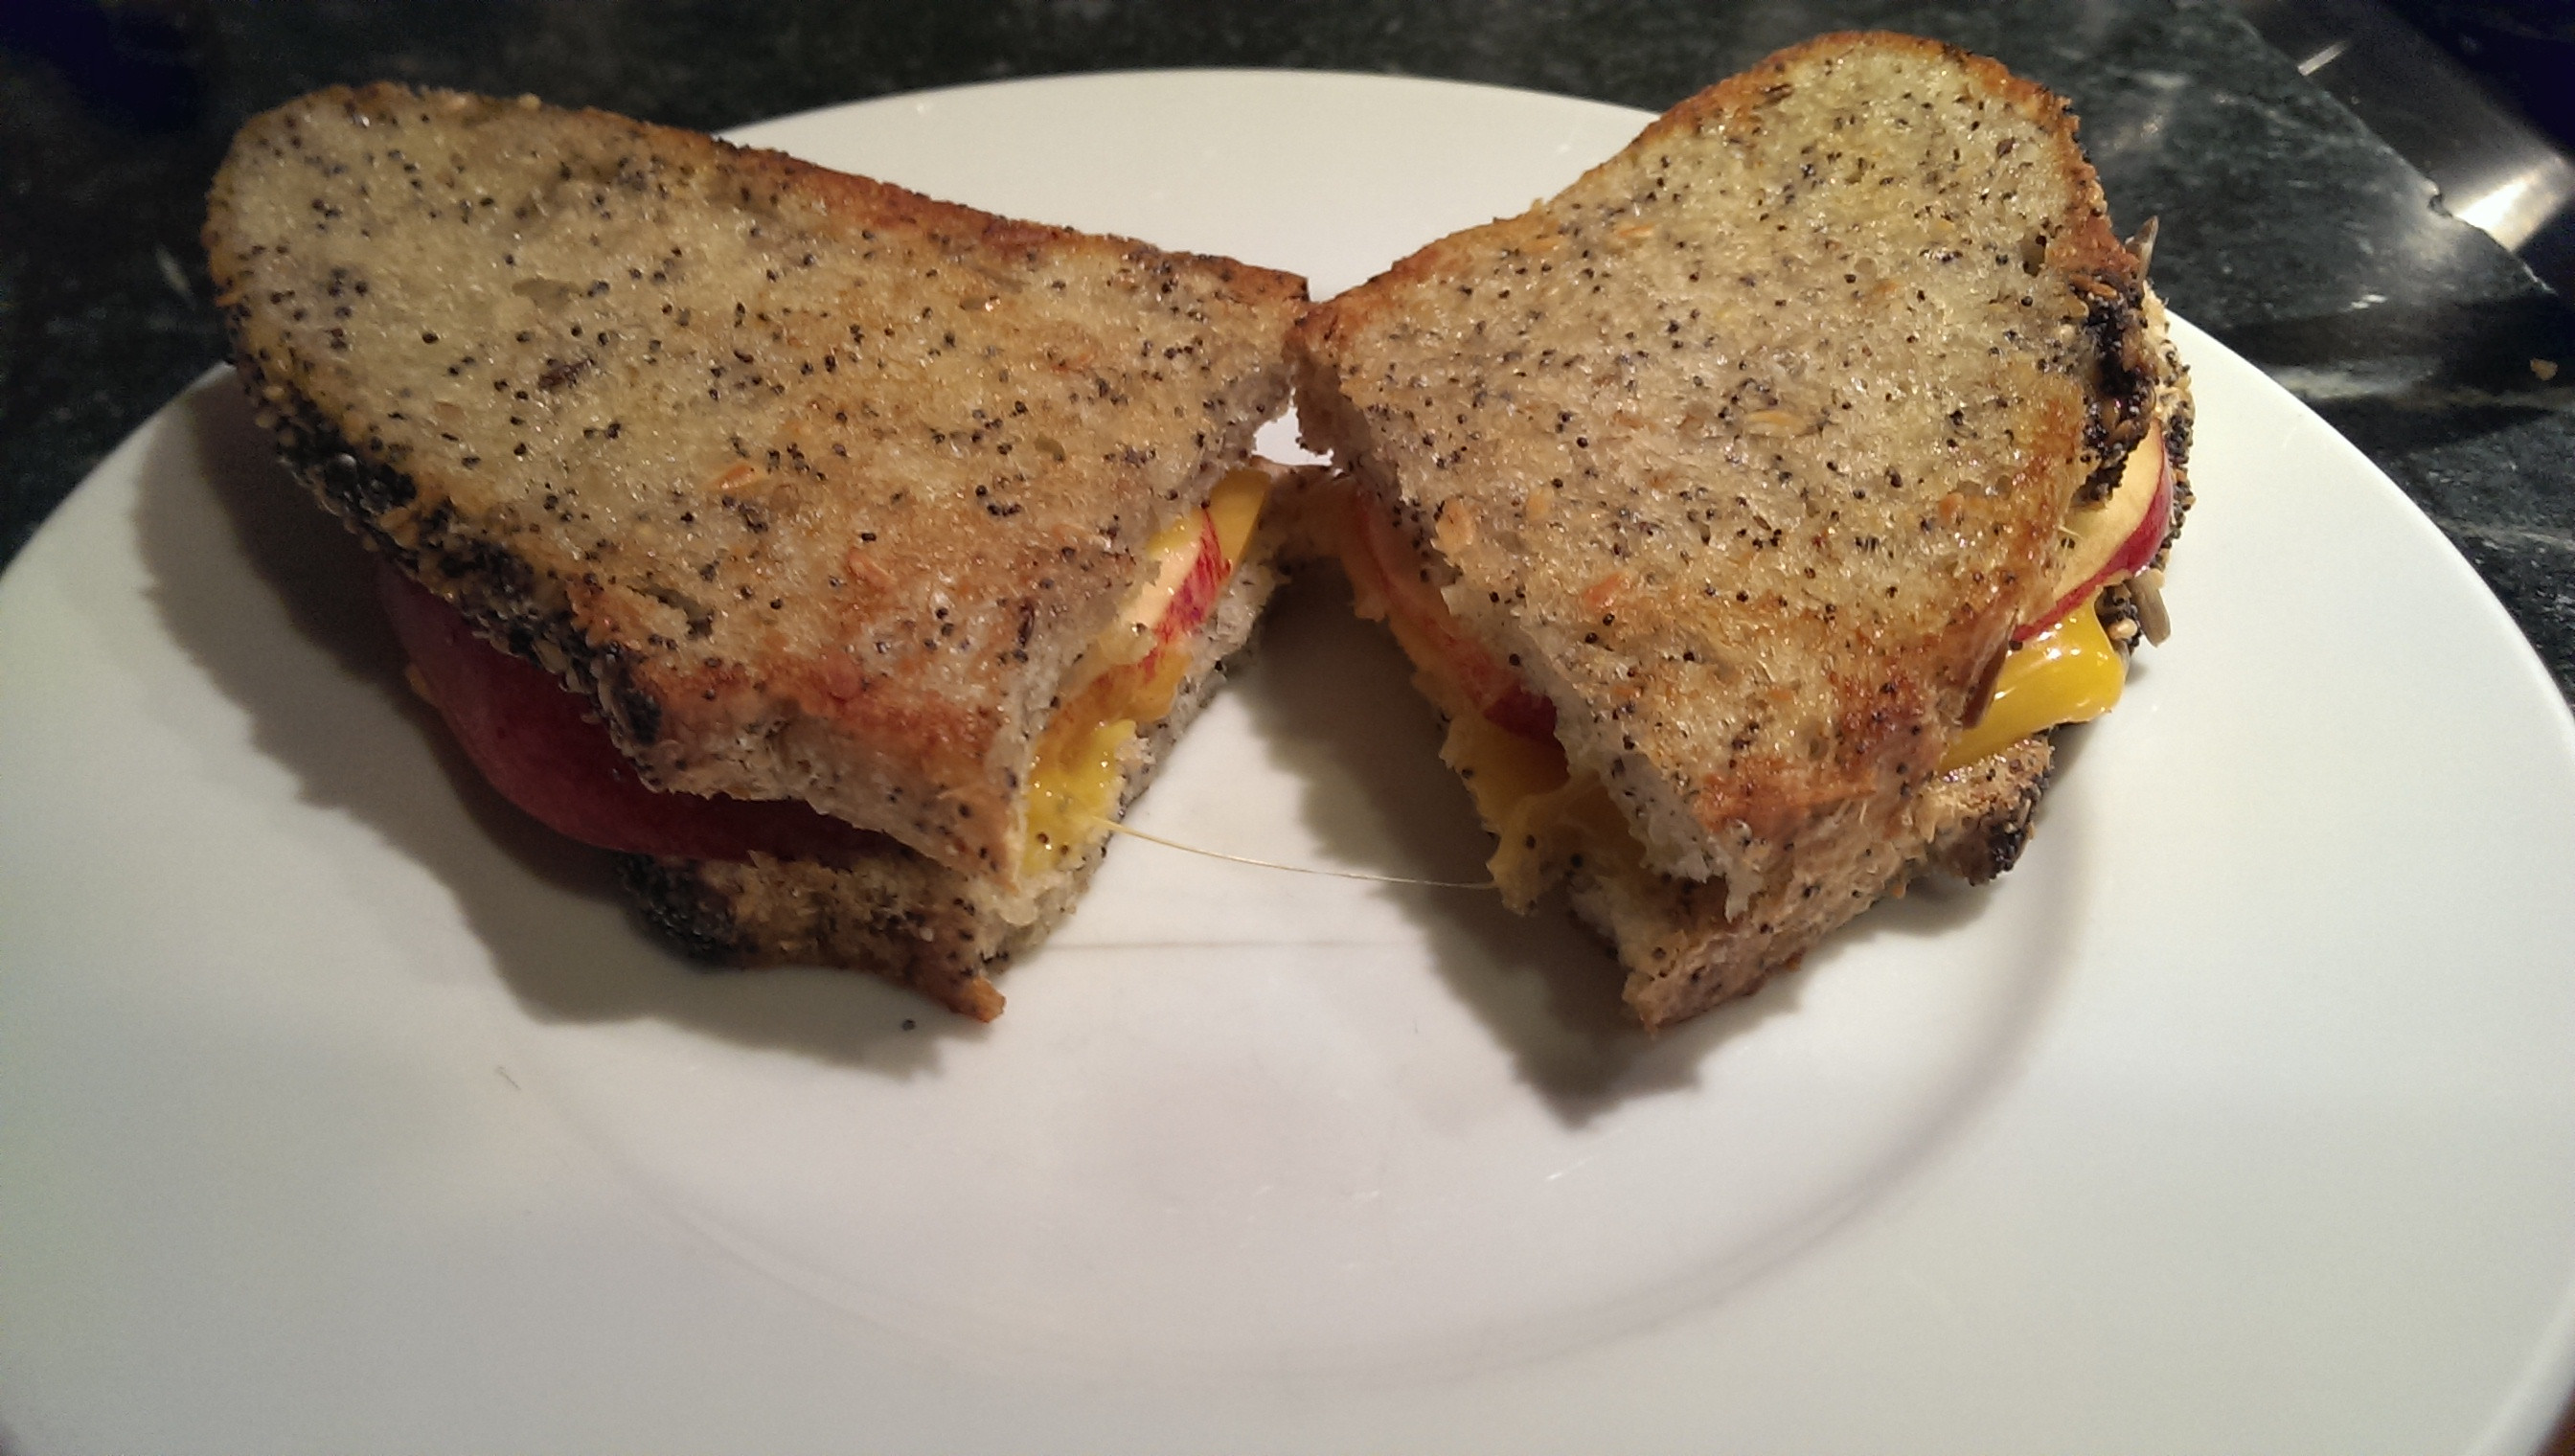 Aged cheddar with apple on poppy seed bread